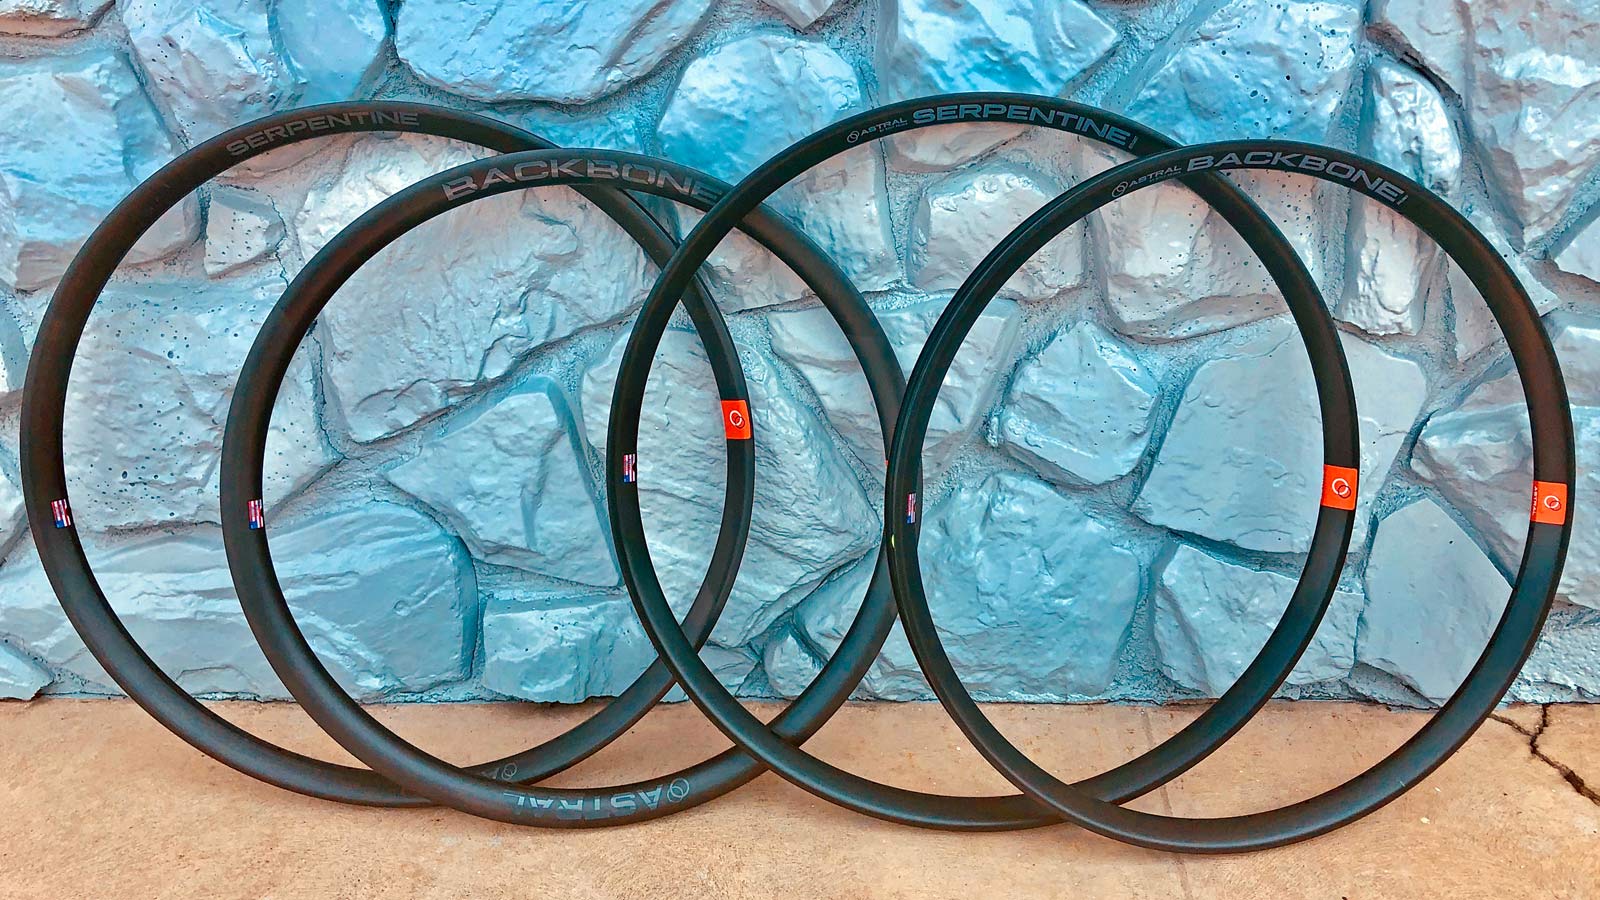 Astral wide MTB rims wheels, 27.5 Backbone, 29 Serpentine, aluminum alloy carbon mountain bike wheels, Made in the USA by Rolf Prima